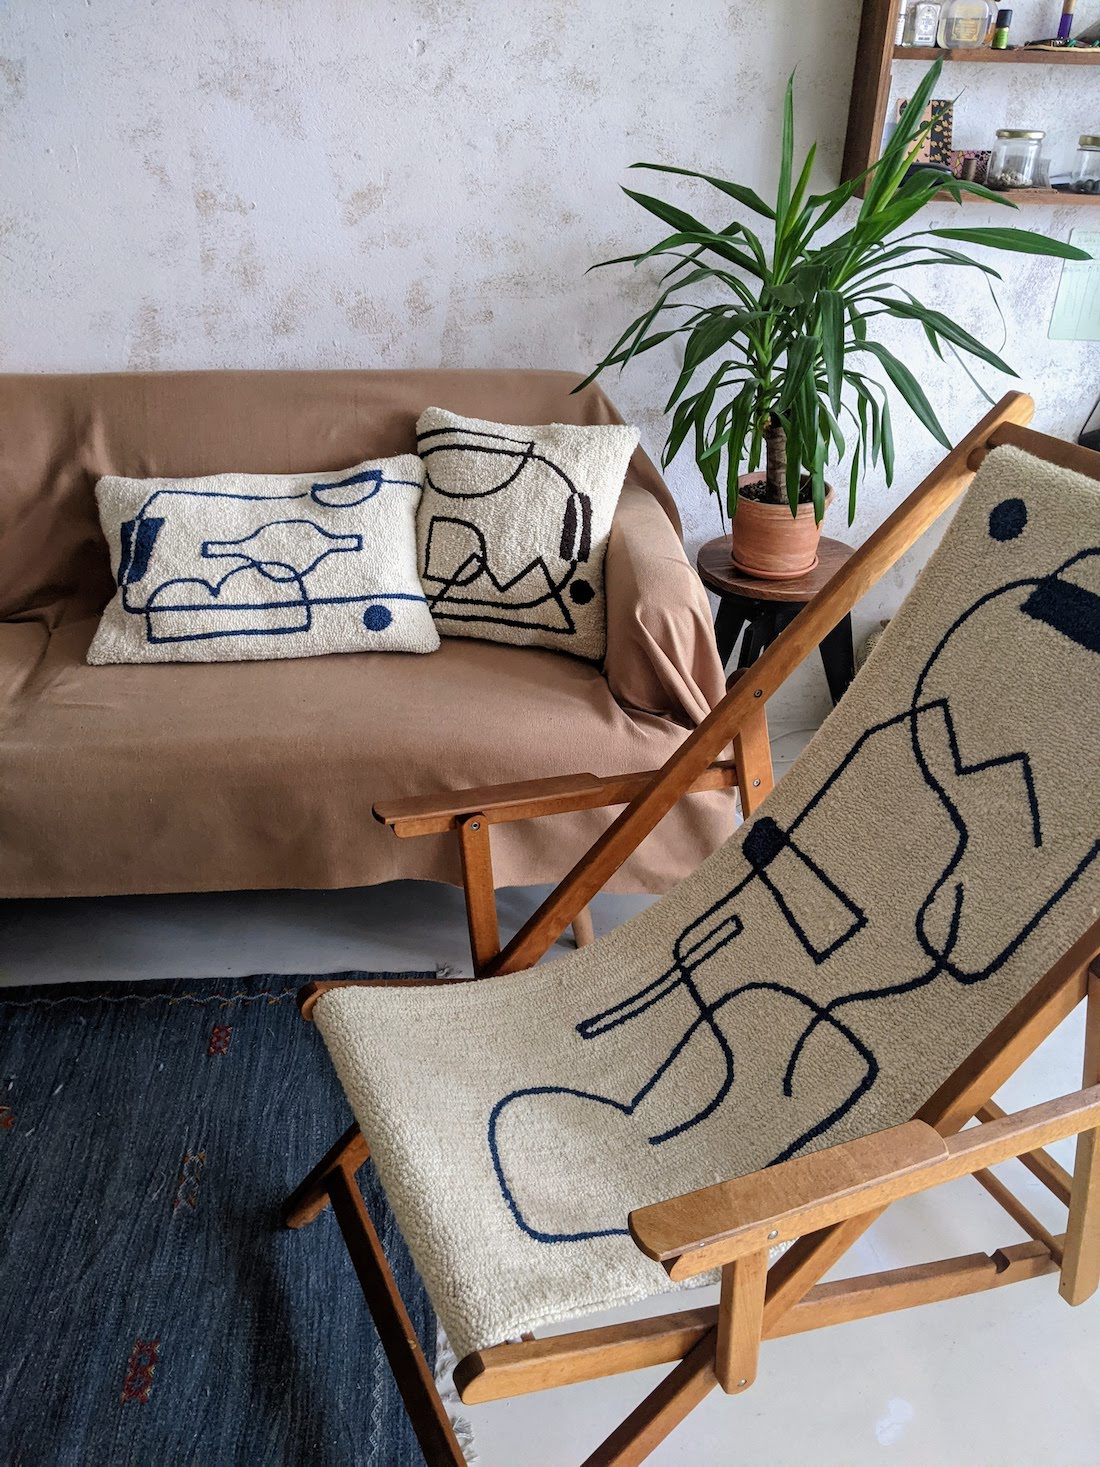 Deck chair and cushions by ito